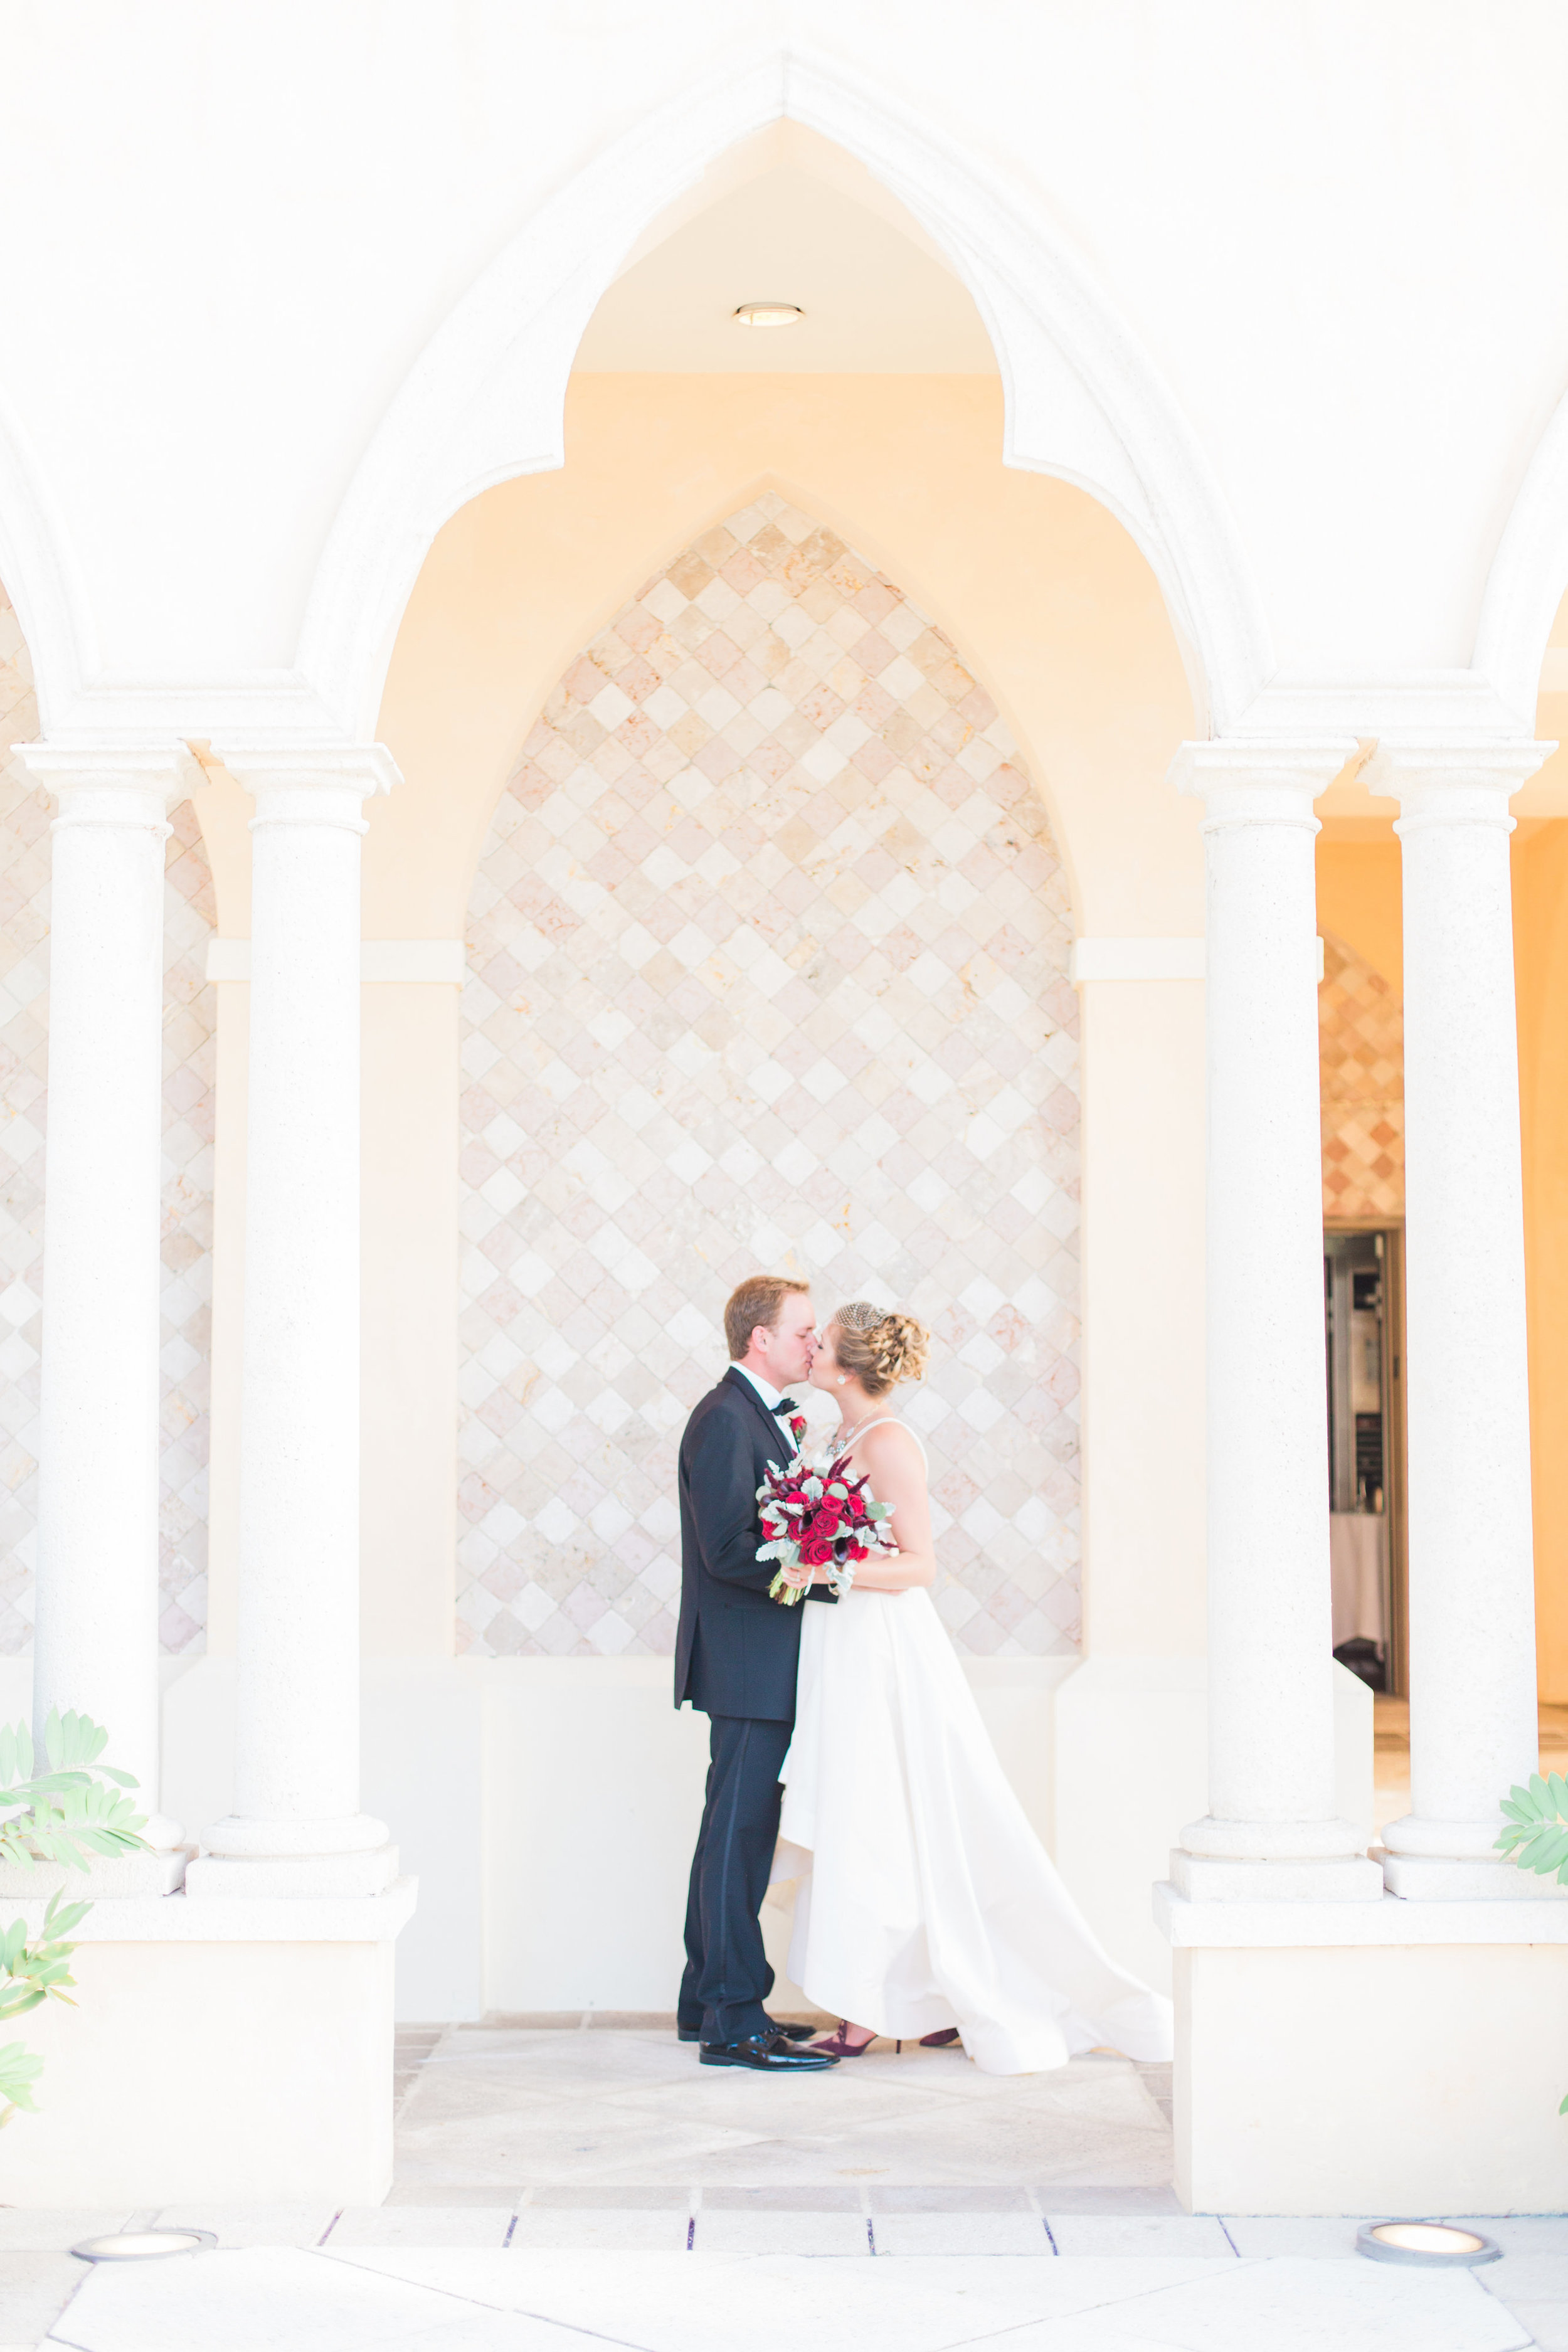  Anne Barge Ryland gown from Little White Dress in Denver | Boca Raton, Florida wedding at The Addison | Thompson Photography Group 